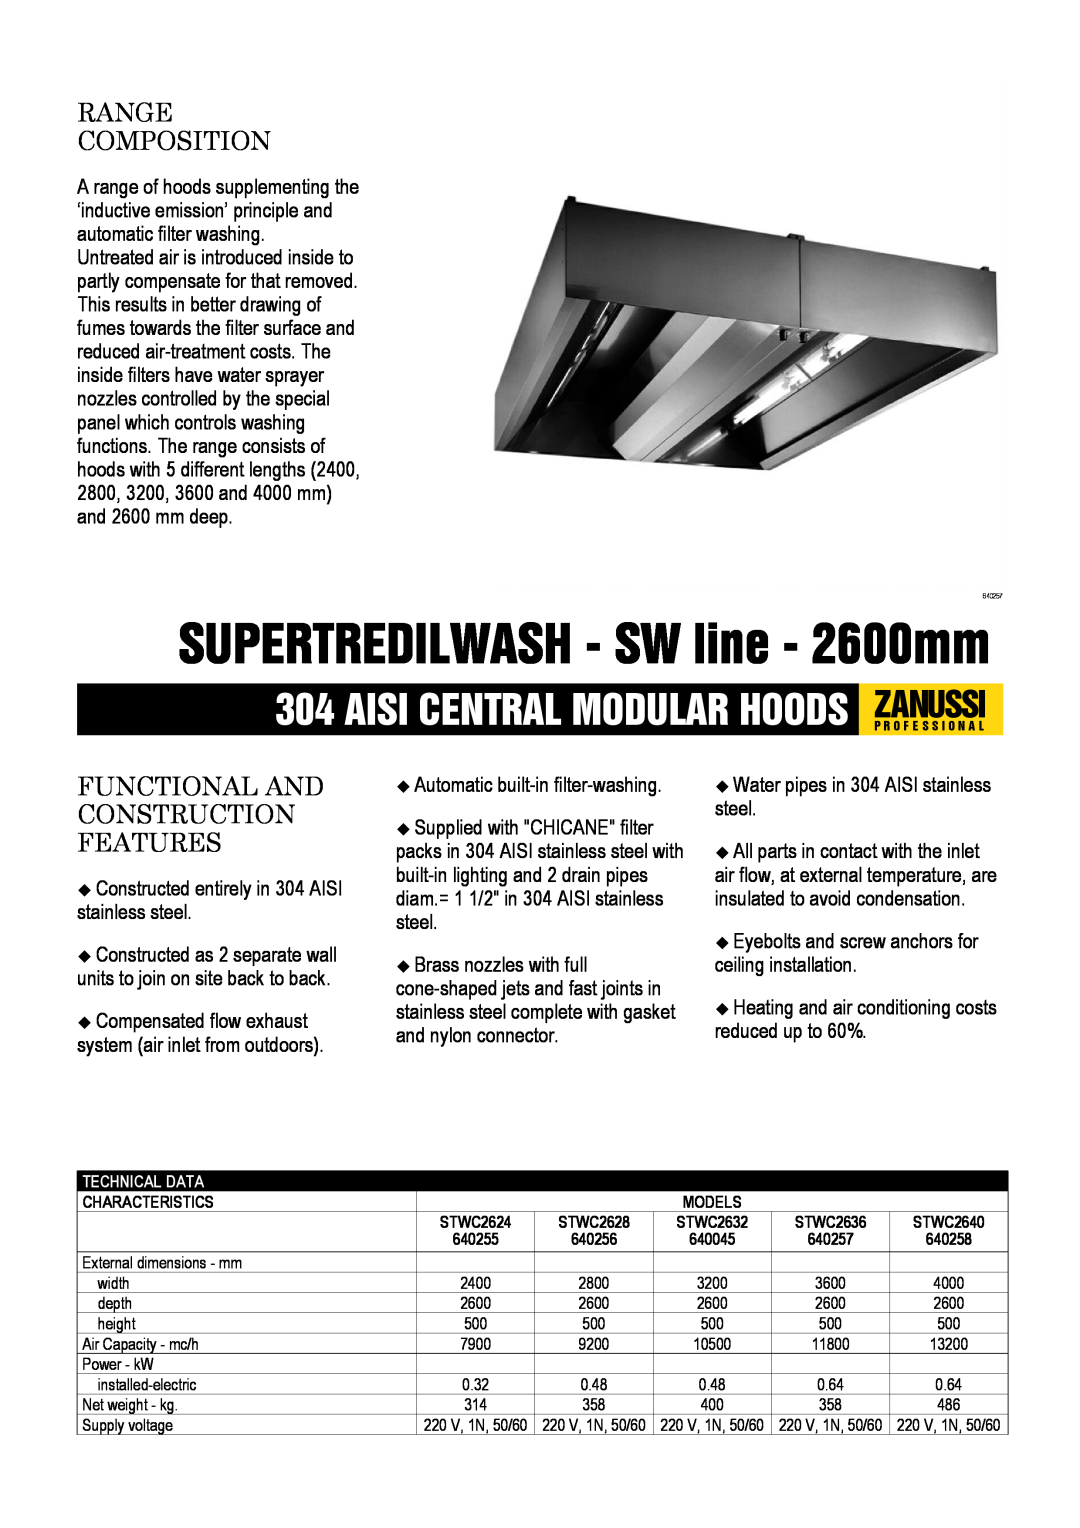 Zanussi 640257 dimensions SUPERTREDILWASH - SW line - 2600mm, Range Composition, Functional And Construction Features 